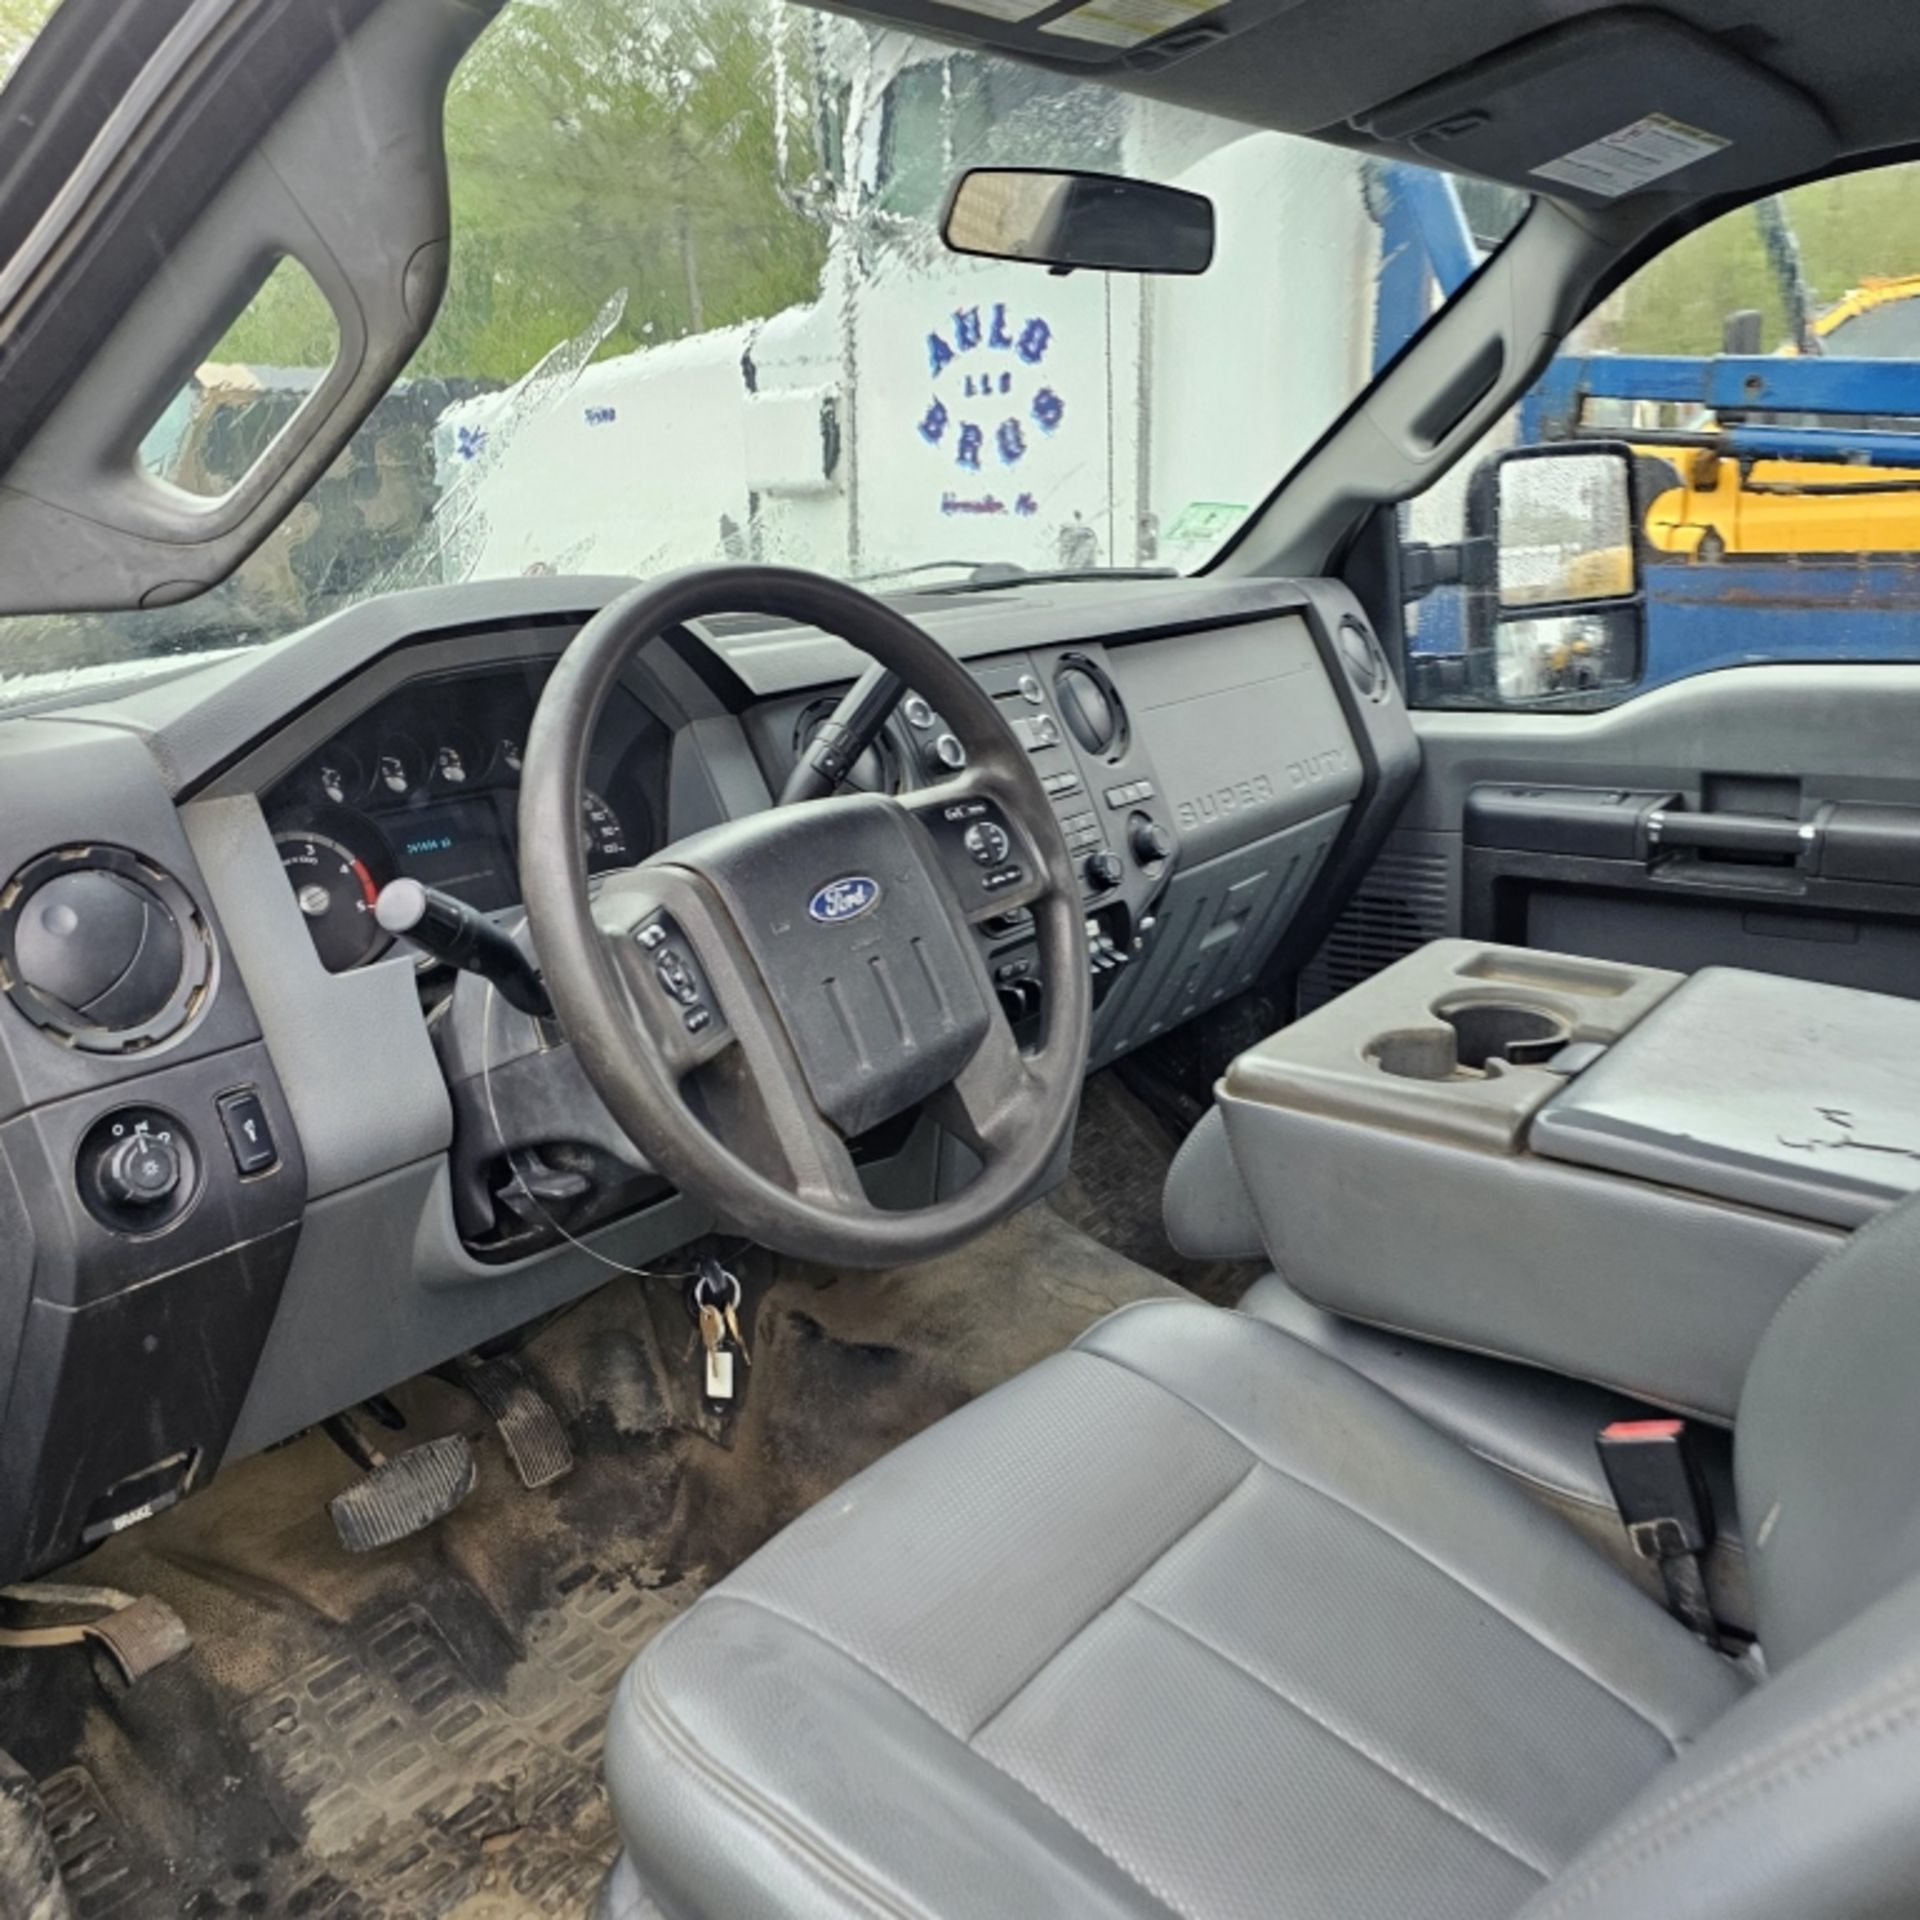 2013 Ford F250 Service Truck - Image 7 of 8